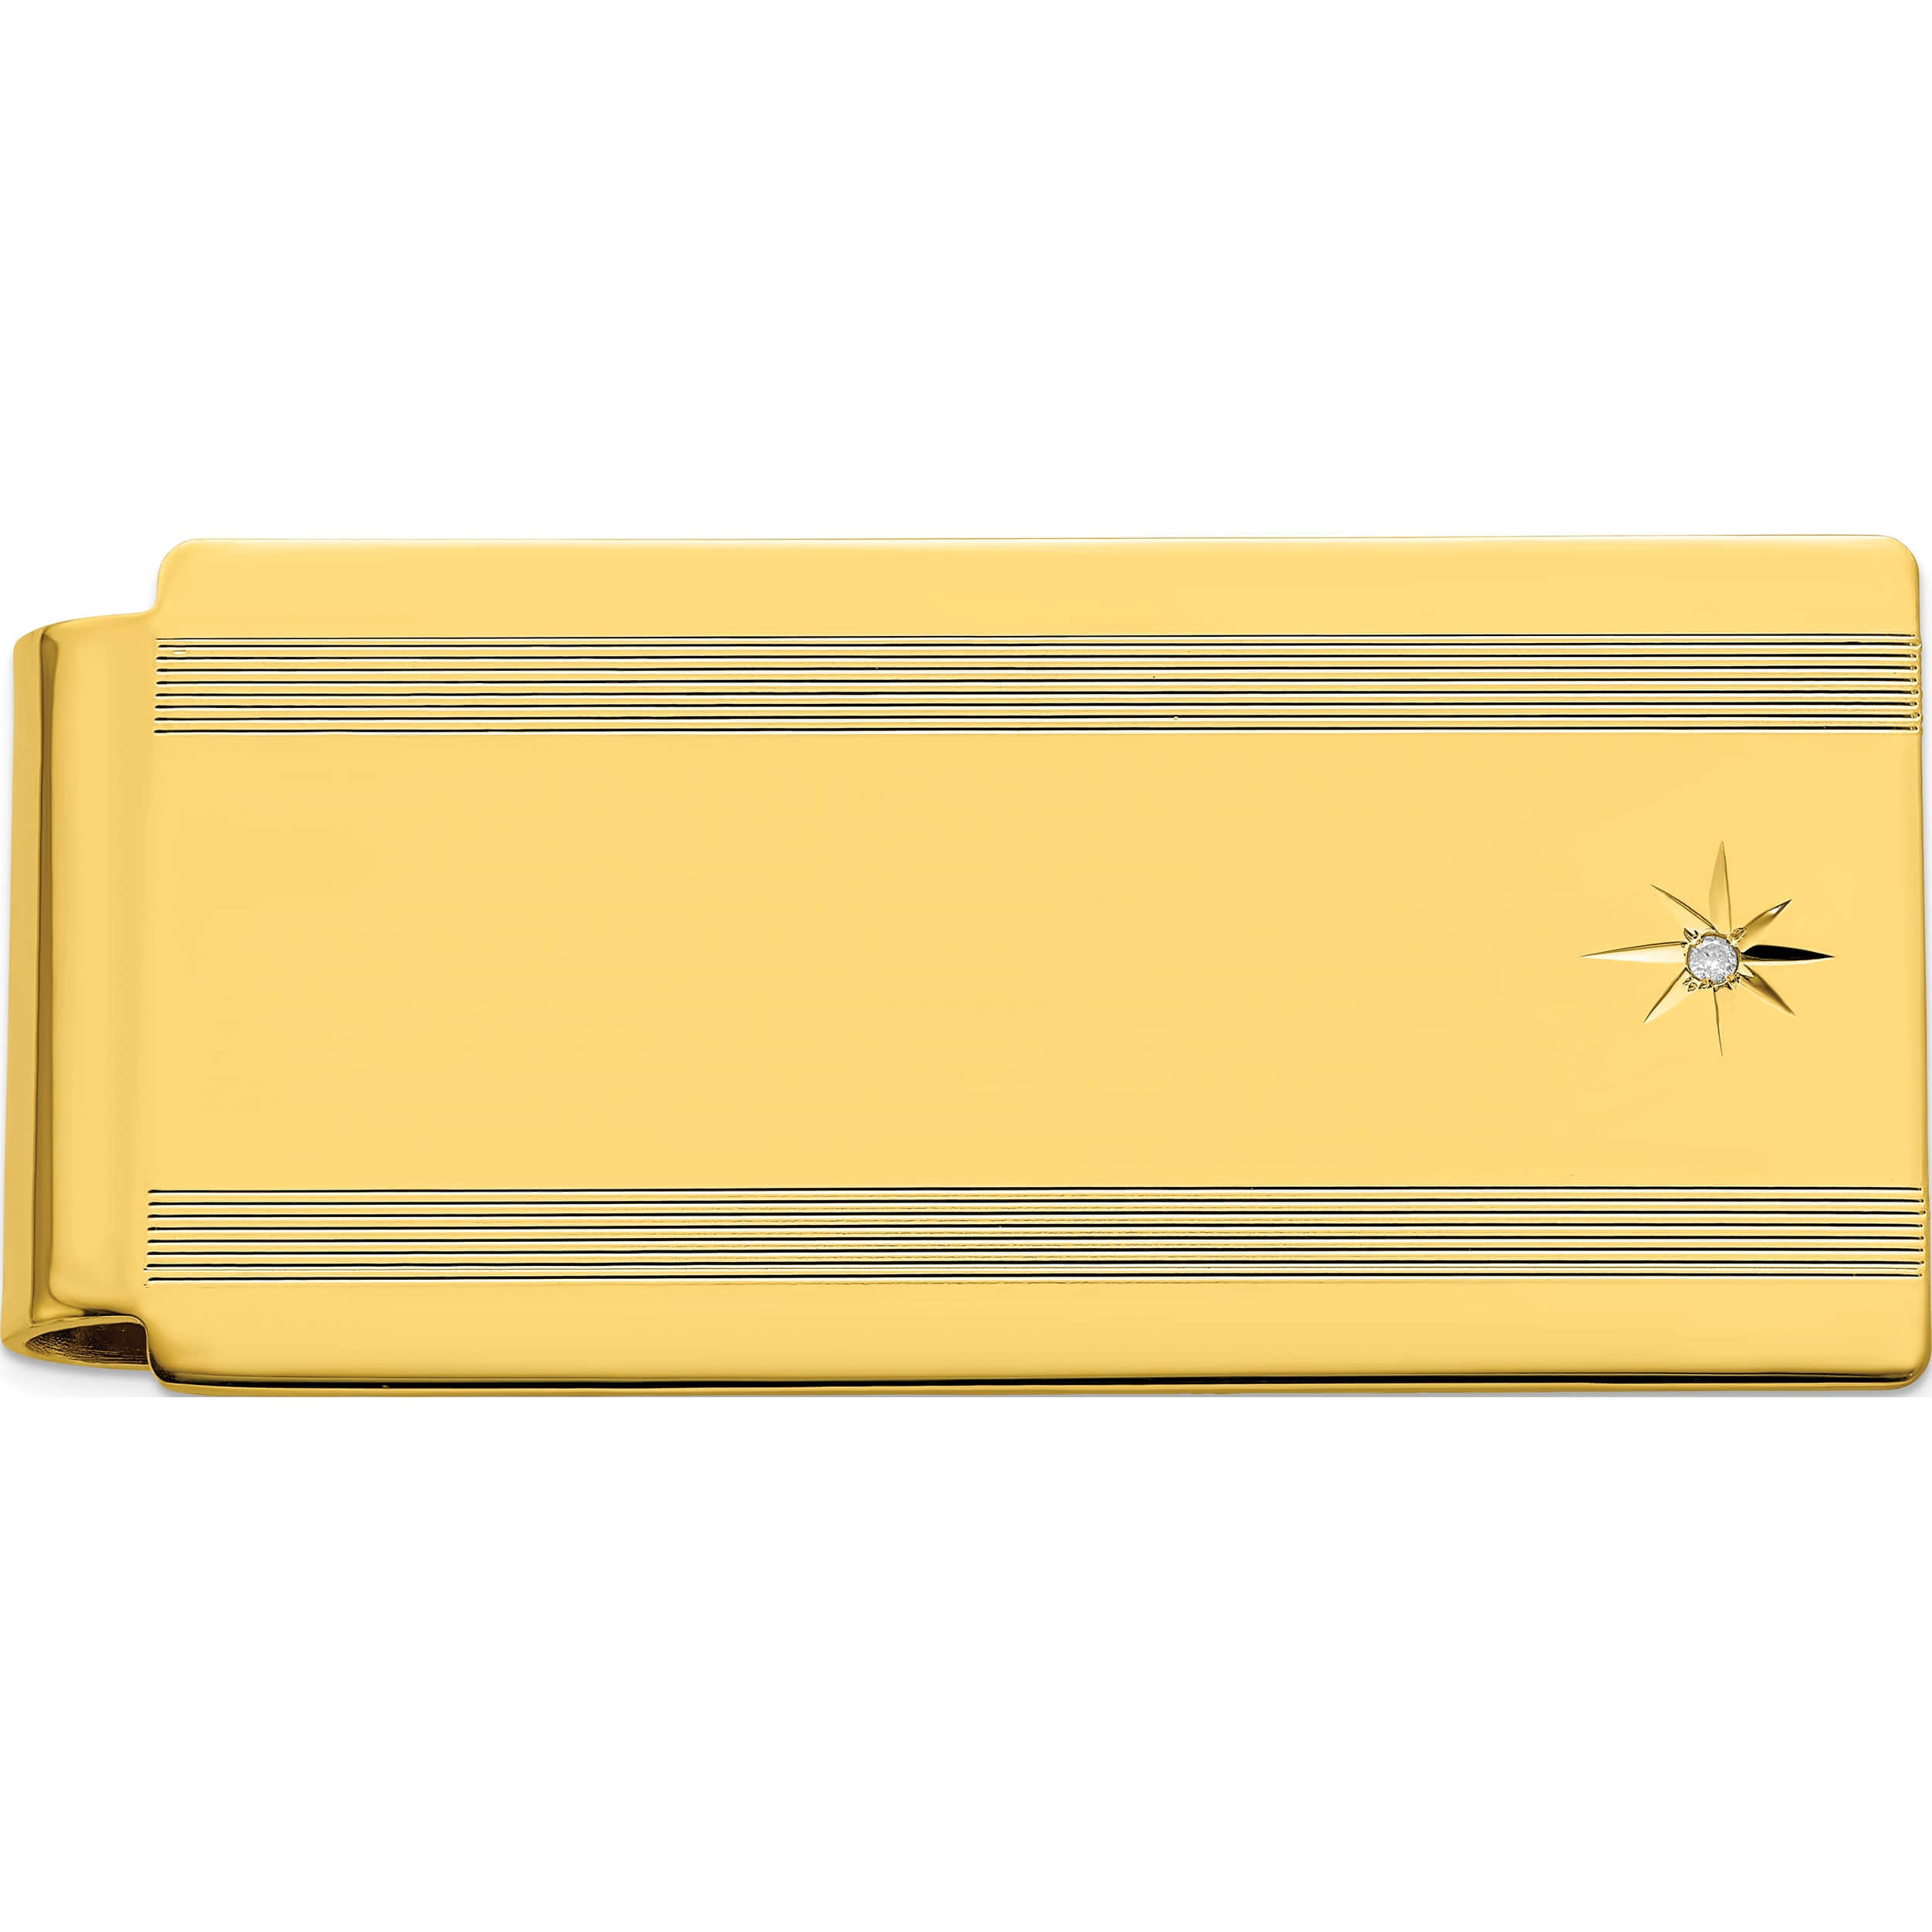 Fashion Gold-Plated Kelly Waters Star Cut .001Ct Diamond Hinged Money Clip (50 X 25) Made In United States gl8770 - image 1 of 5